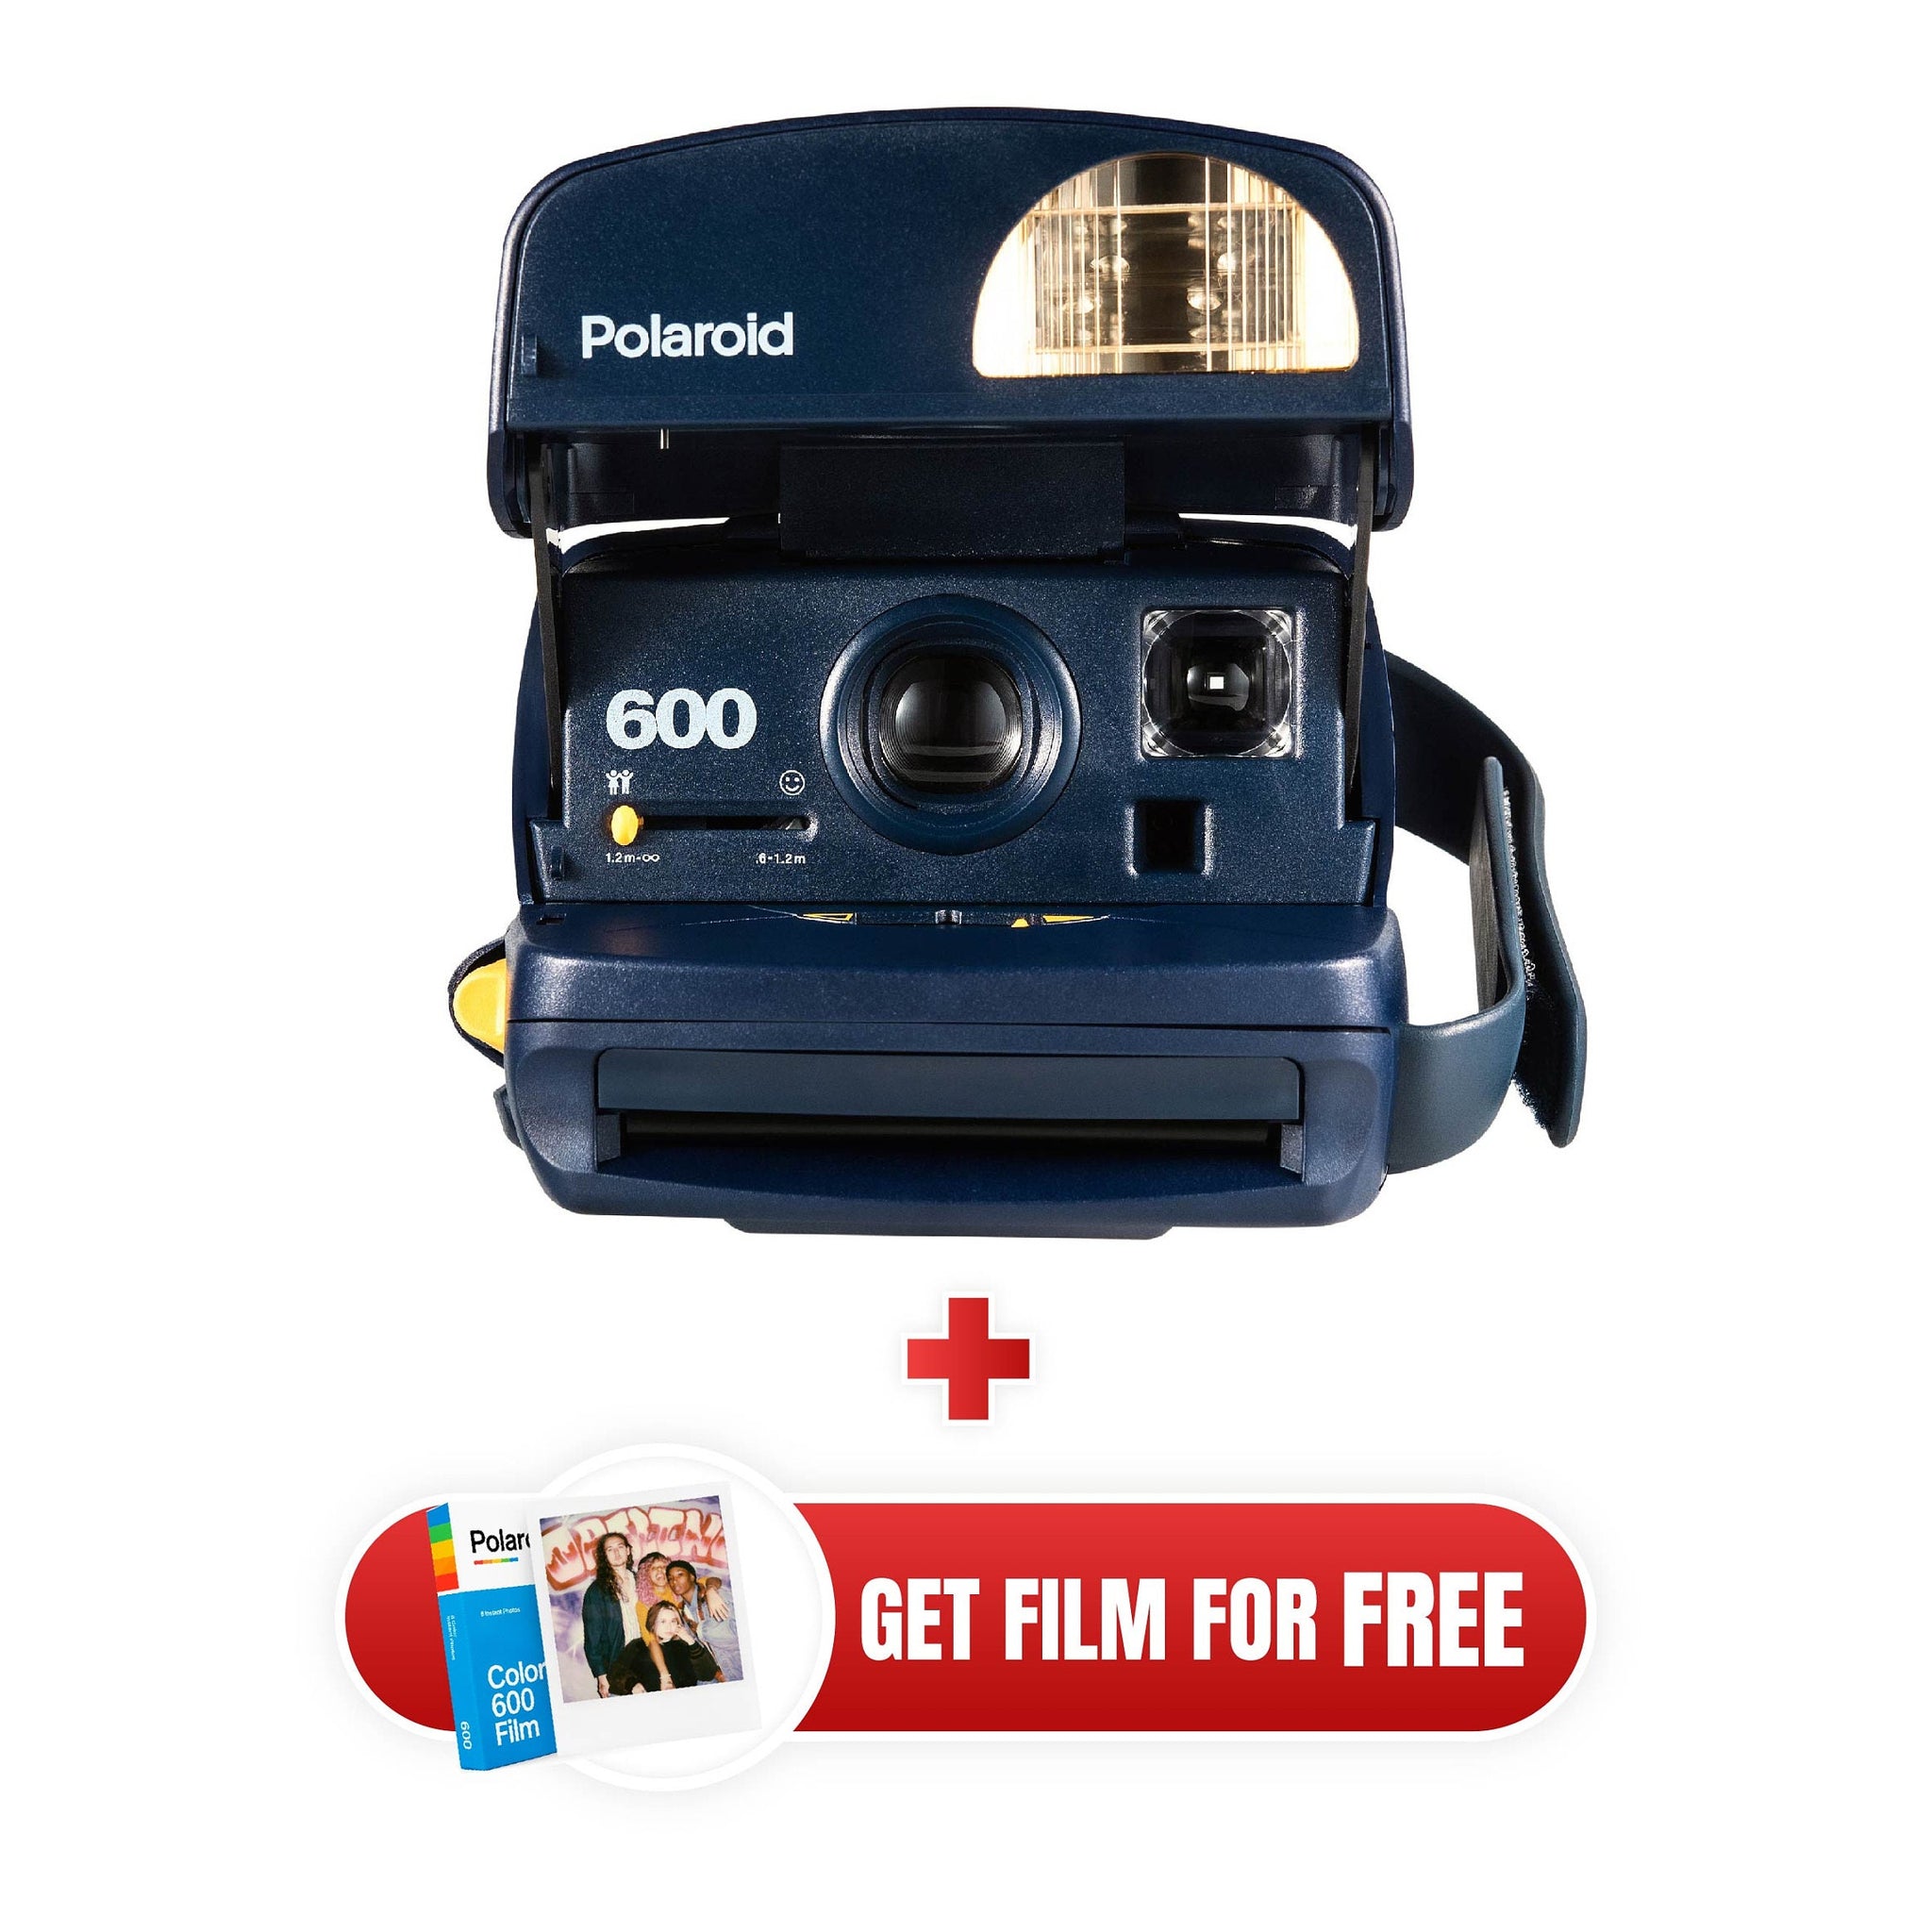 Capture Nostalgic Memories with our Refurbished 80s Style Polaroid 600 Camera - Perfect for Instant Photography Enthusiasts! - Vintage Polaroid Instant Cameras